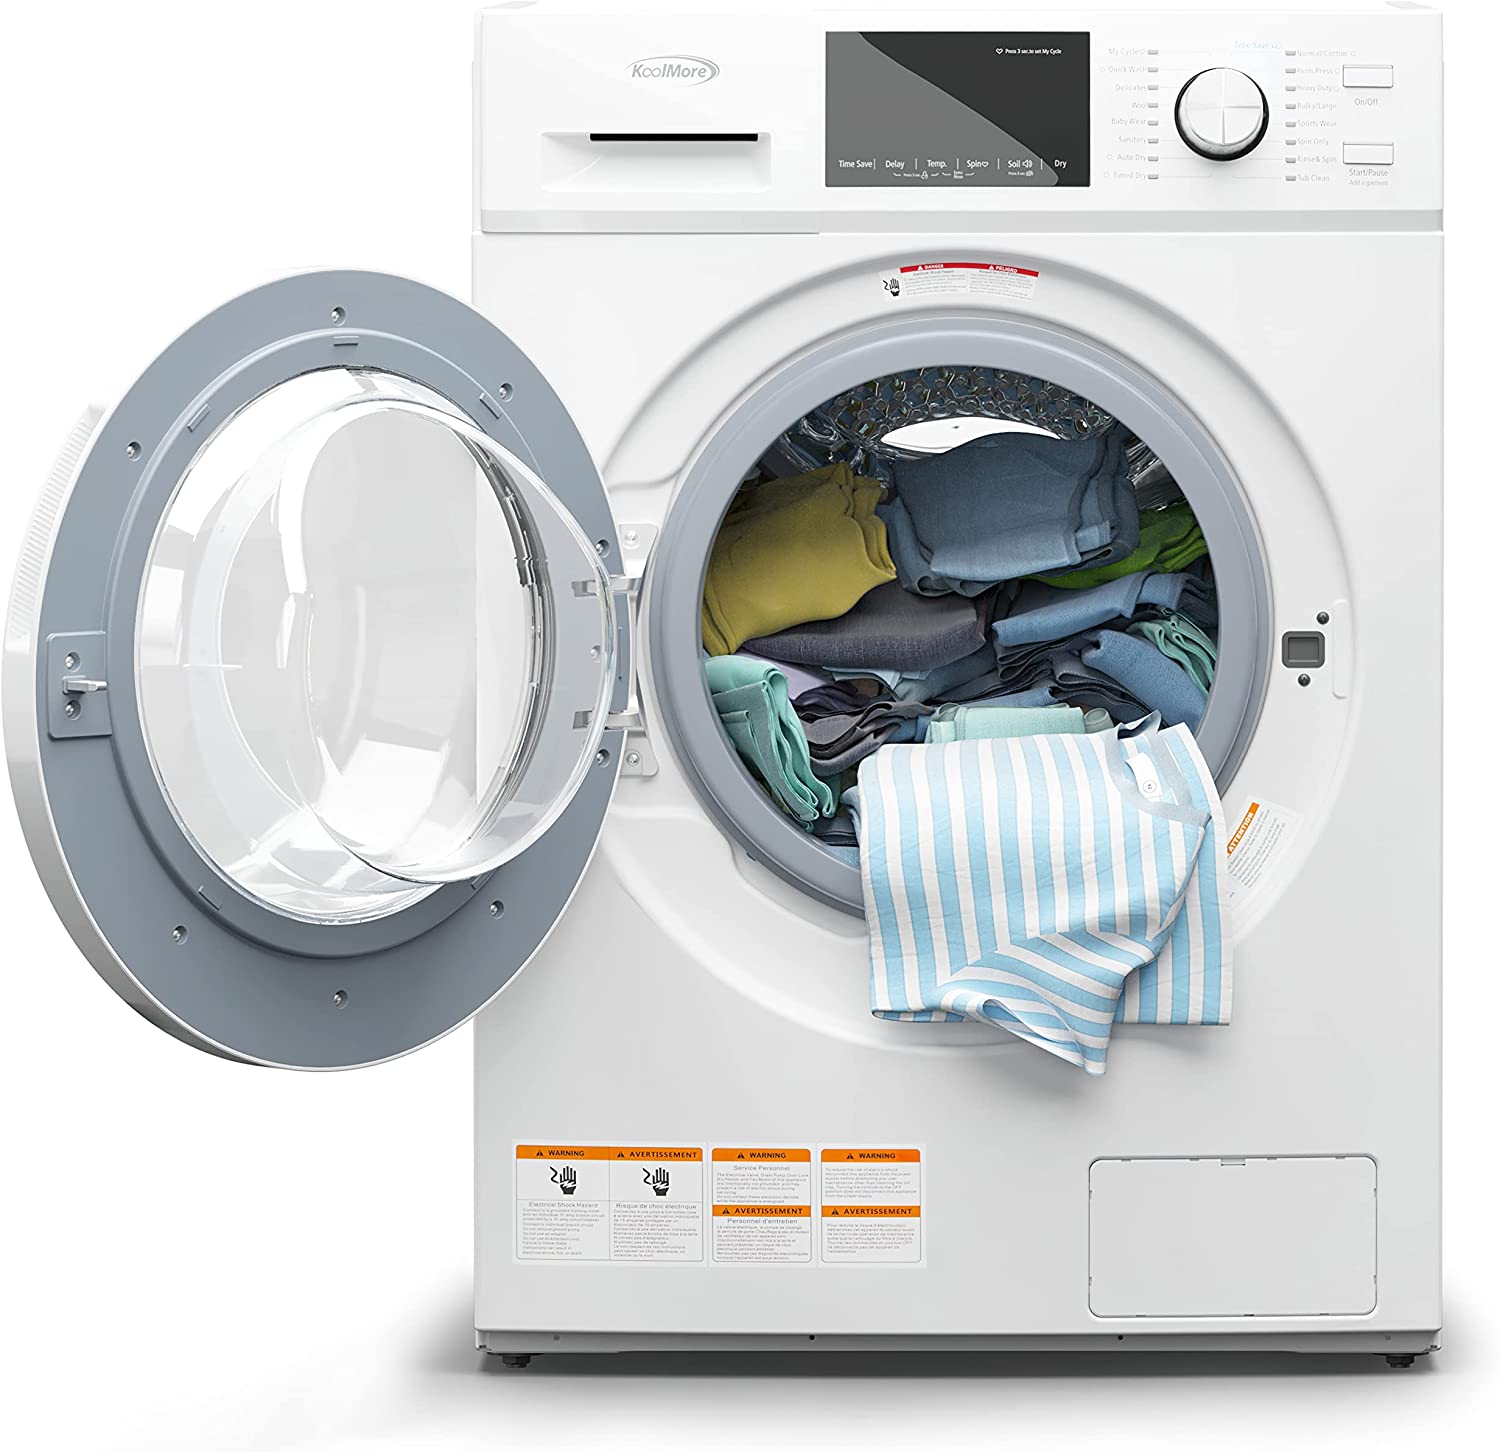 Exploring More Top Washer-Dryer Combos